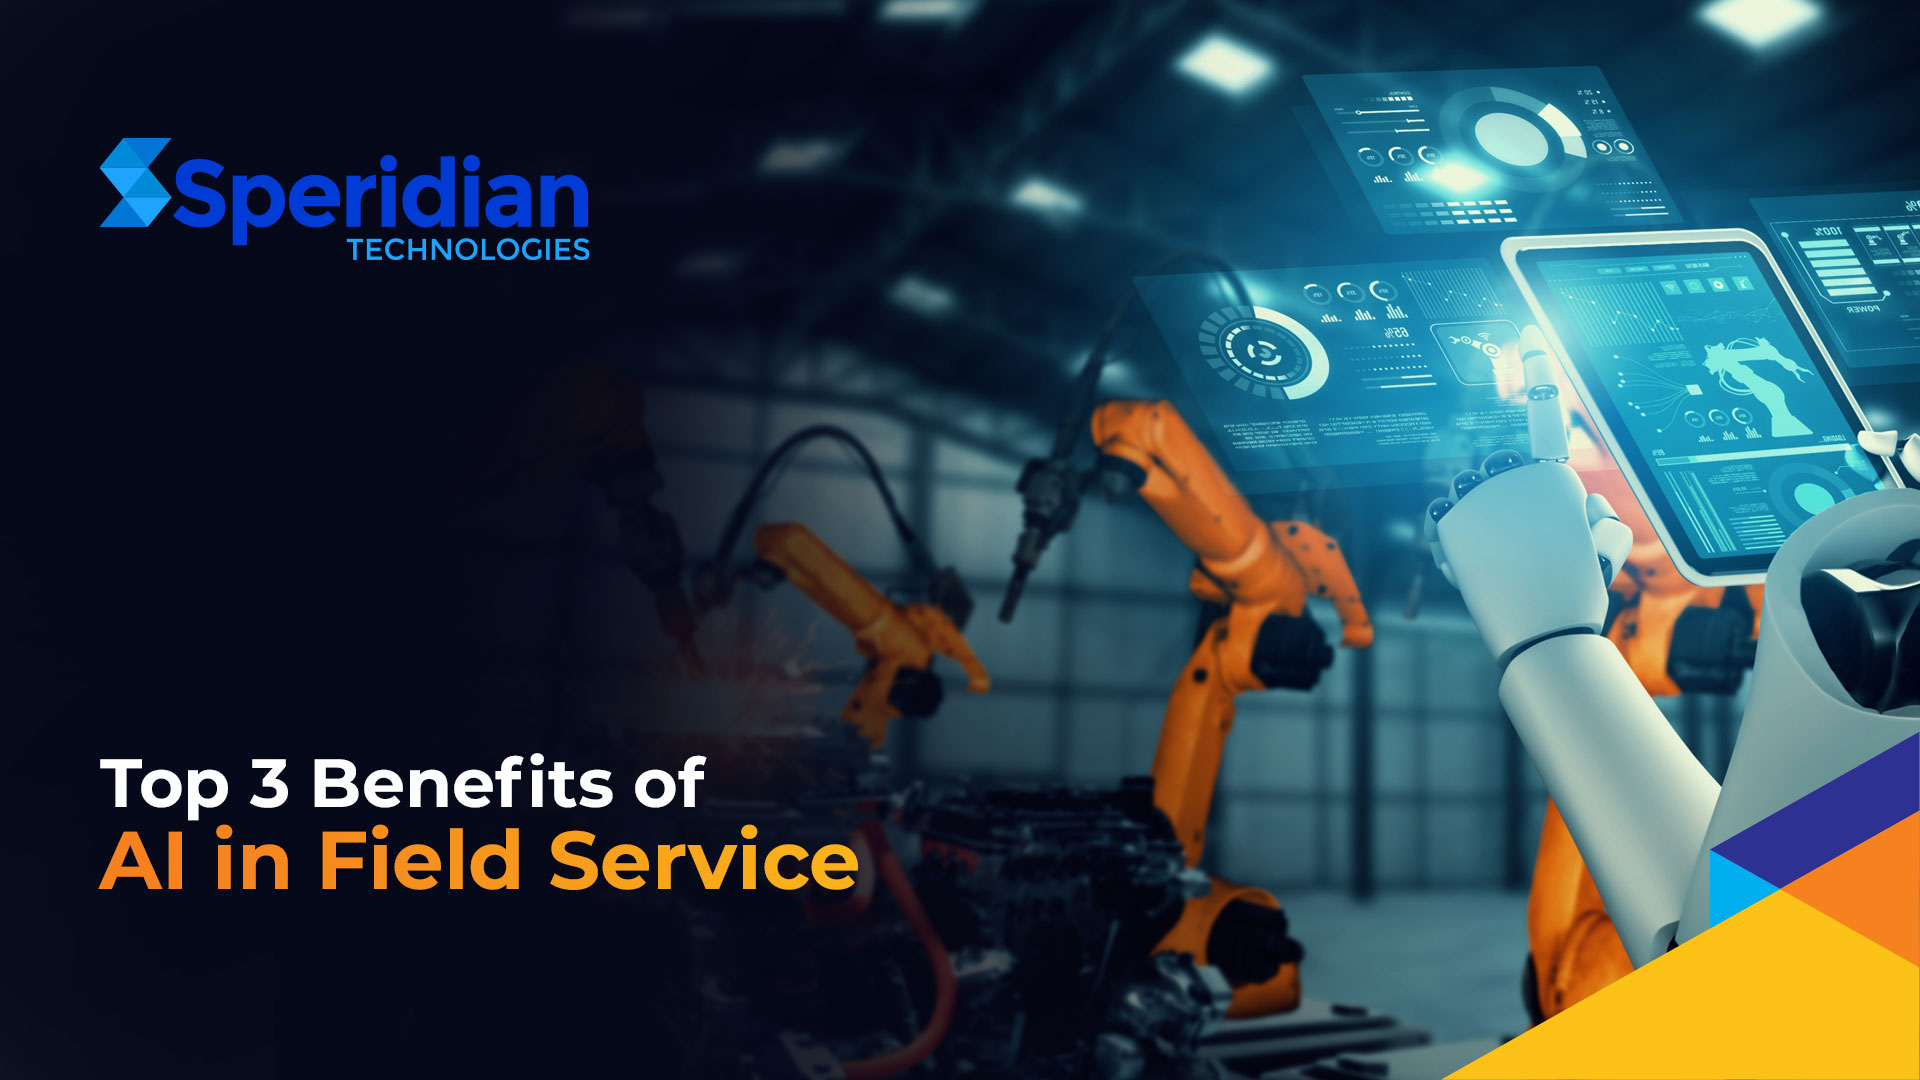 Top 3 Benefits of AI in Field Service